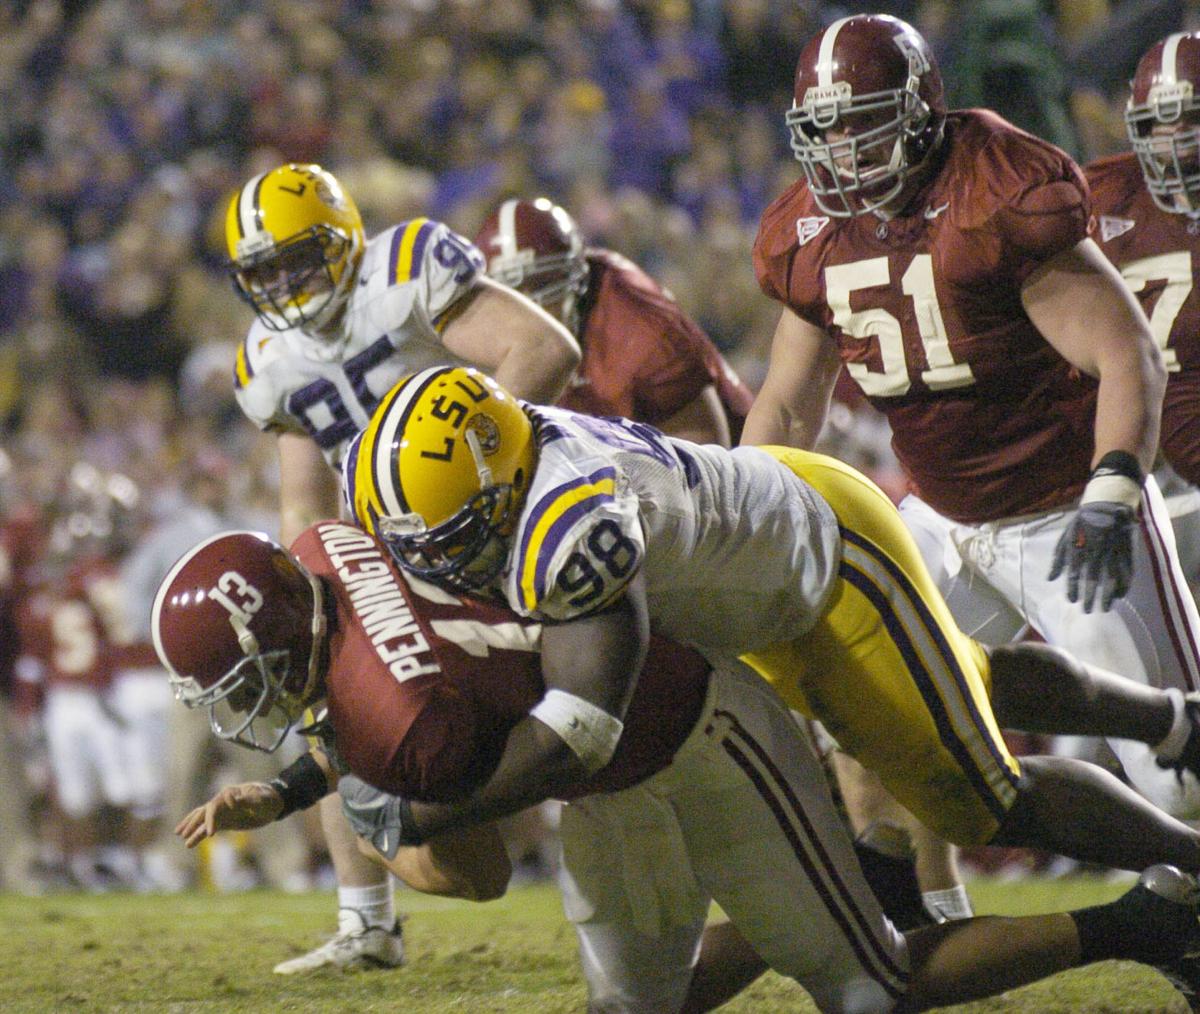 Lsu Vs Alabama Rivalry History By The Numbers See 12